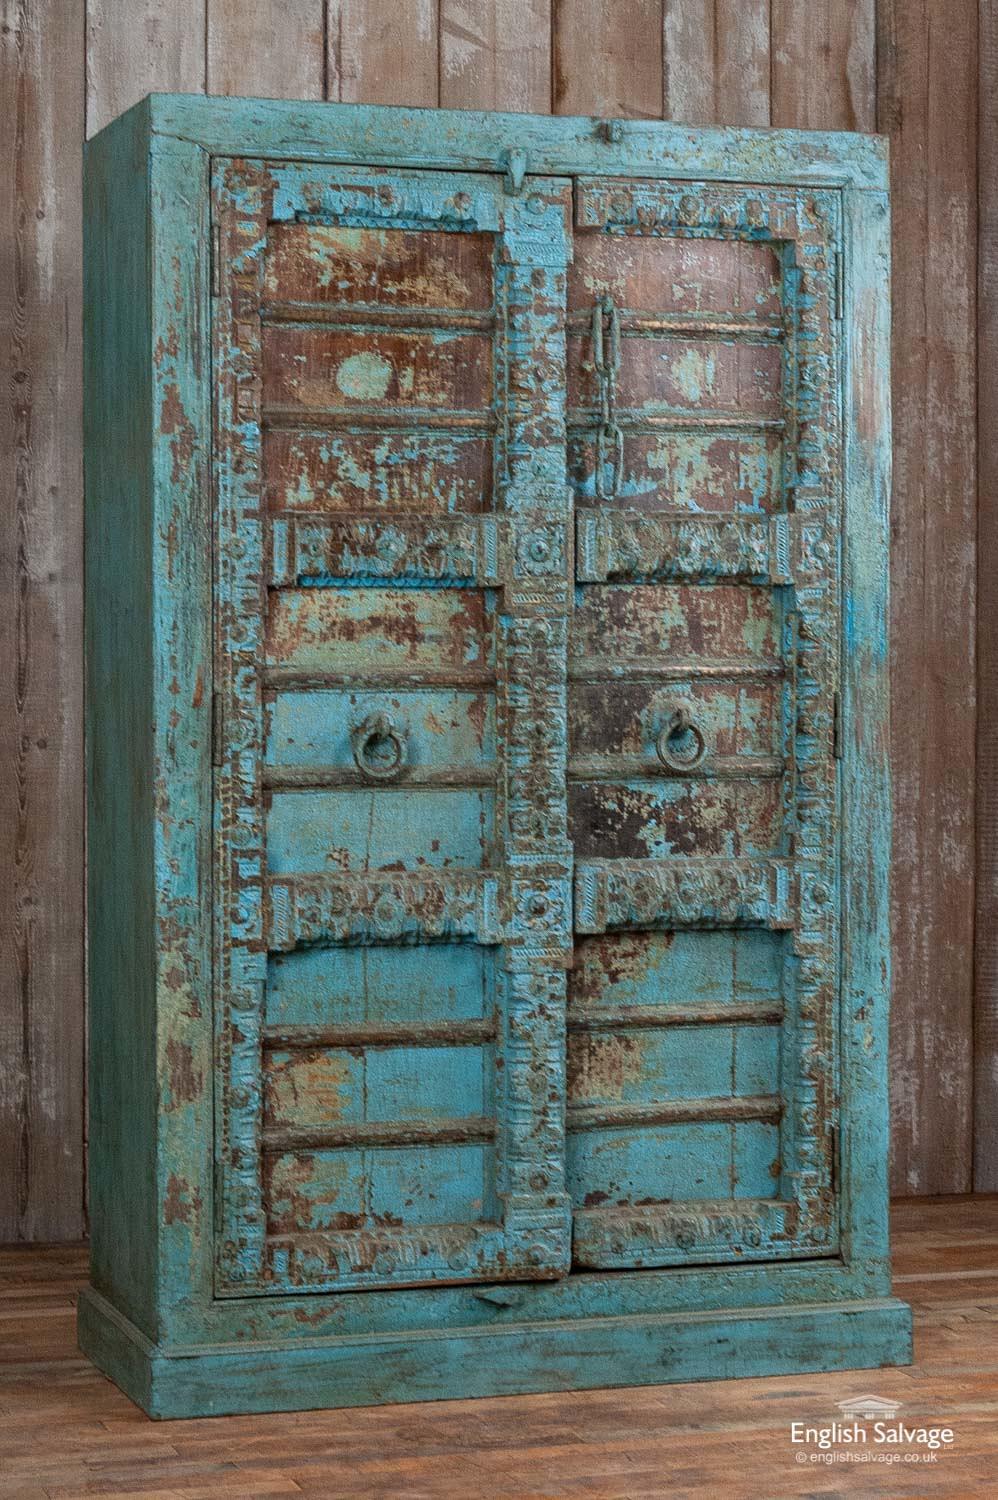 Useful cupboard made from antique Indian doors and reclaimed hardwood. Would make a good linen cupboard or kitchen cupboard as it has three fixed internal shelves. Painted an attractive blue / turquoise over yellow and brown with crackle paint